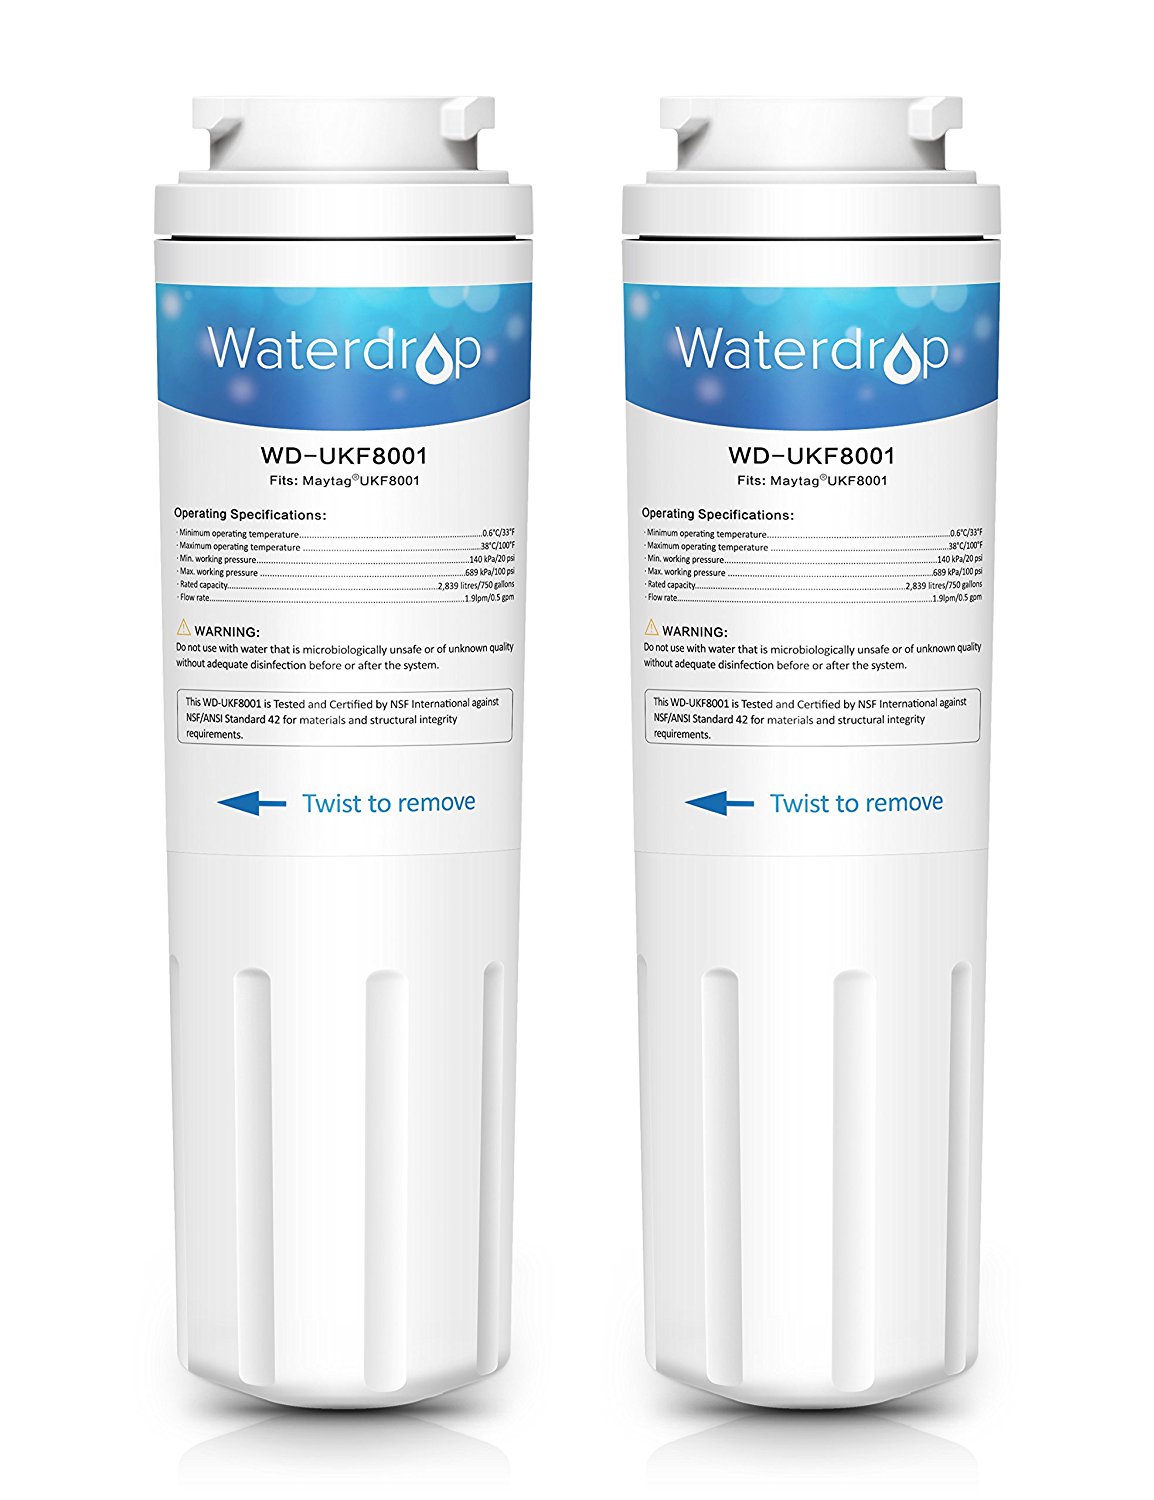 2 Pack Waterdrop UKF8001 Replacement for PUR, Jenn-Air, Maytag UKF8001, UKF8001AXX, UKF8001P, EDR4RXD1, Whirlpool 4396395, Puriclean II, 469006 Refrigerator Water Filter